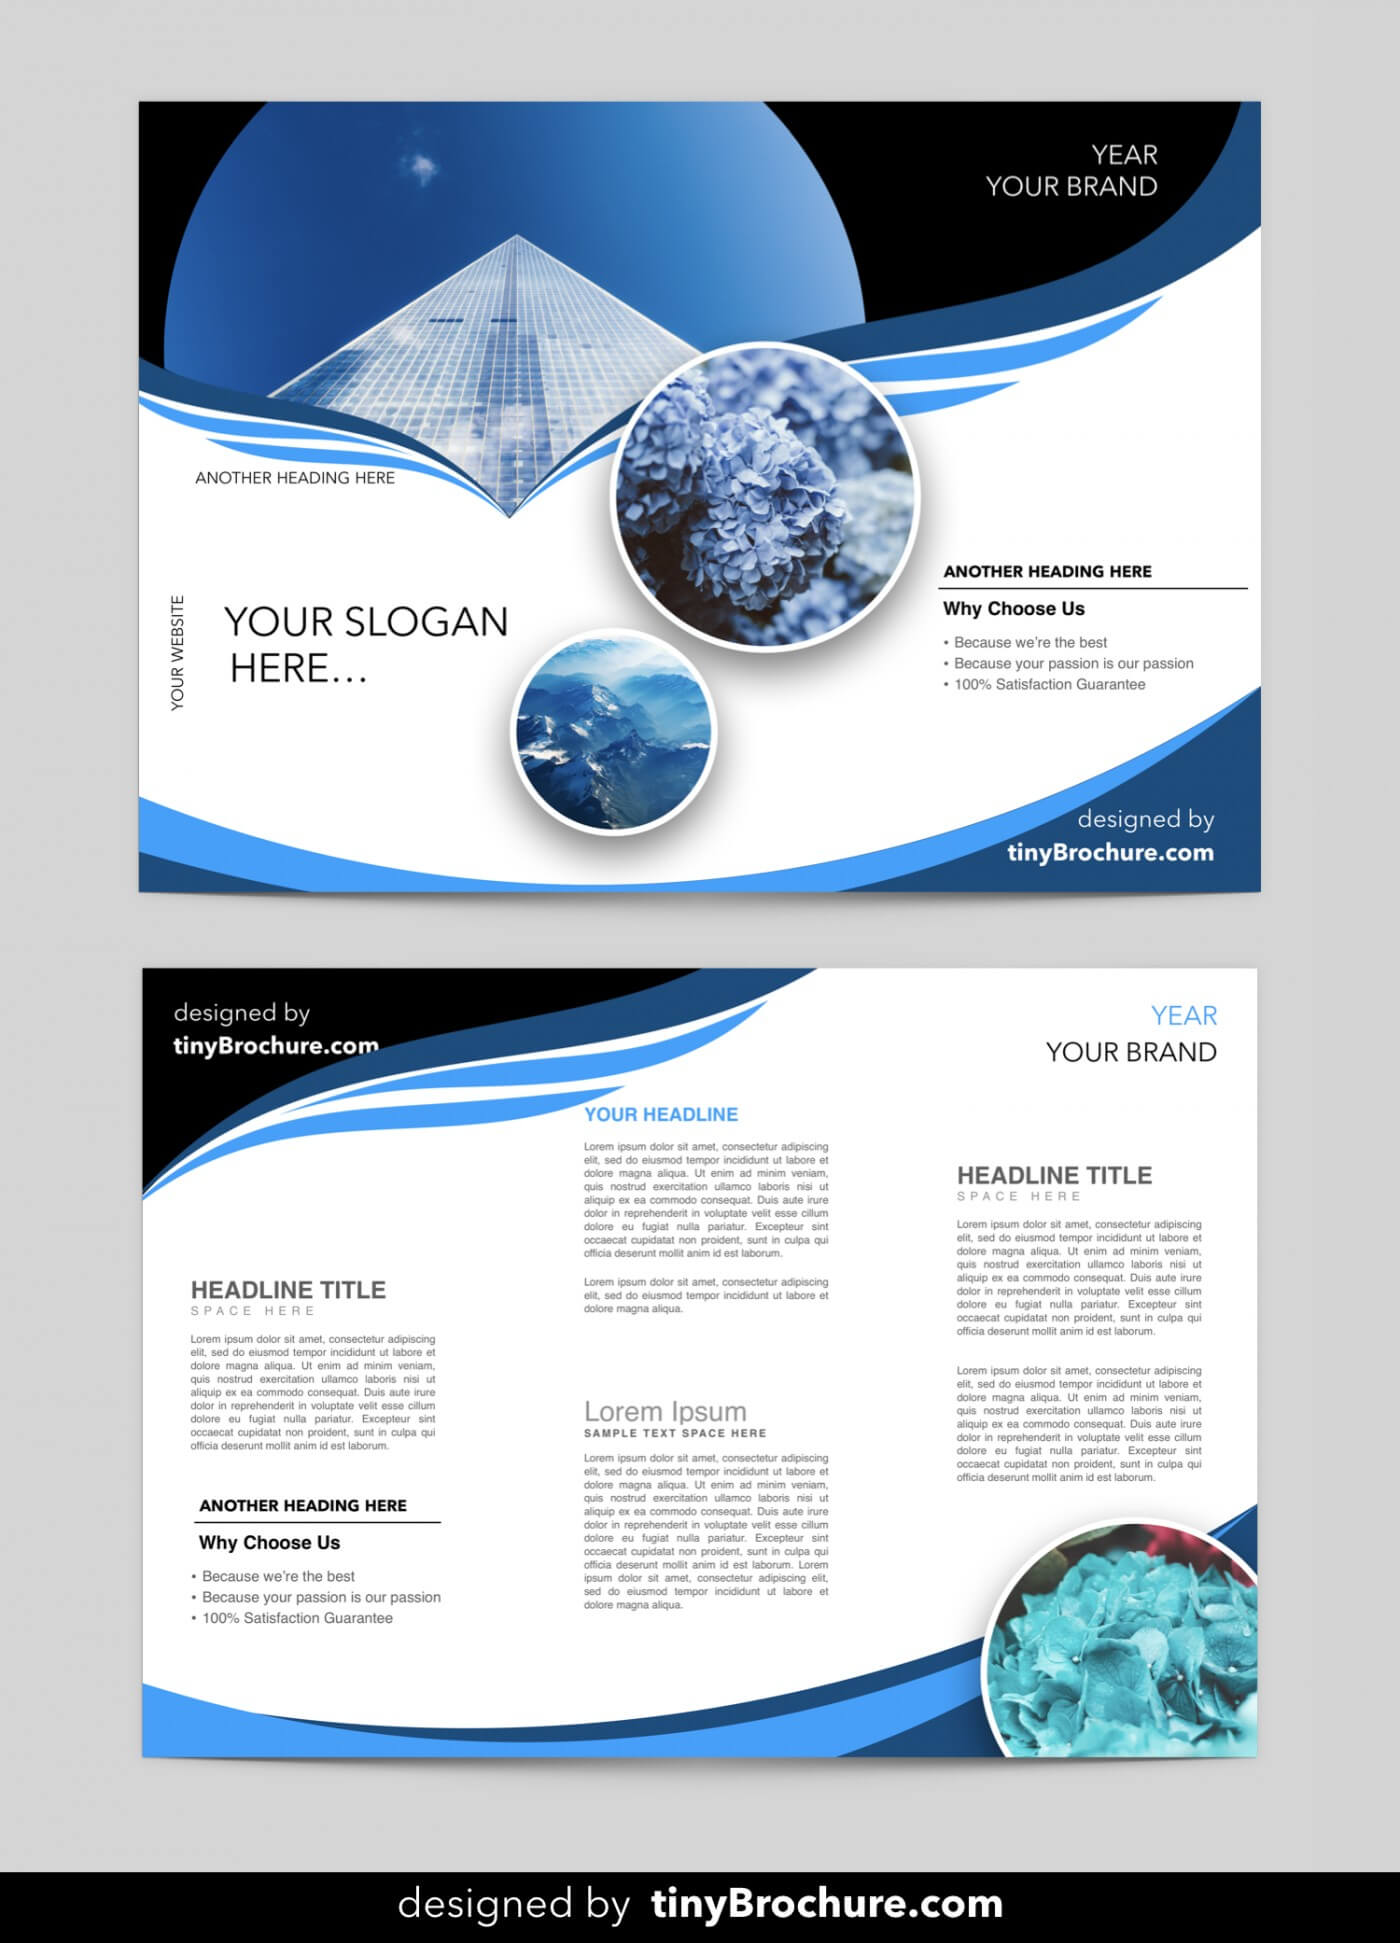 Stunning Ms Word Design Templates Free Download – Ironi For Free Brochure Templates For Word 2010